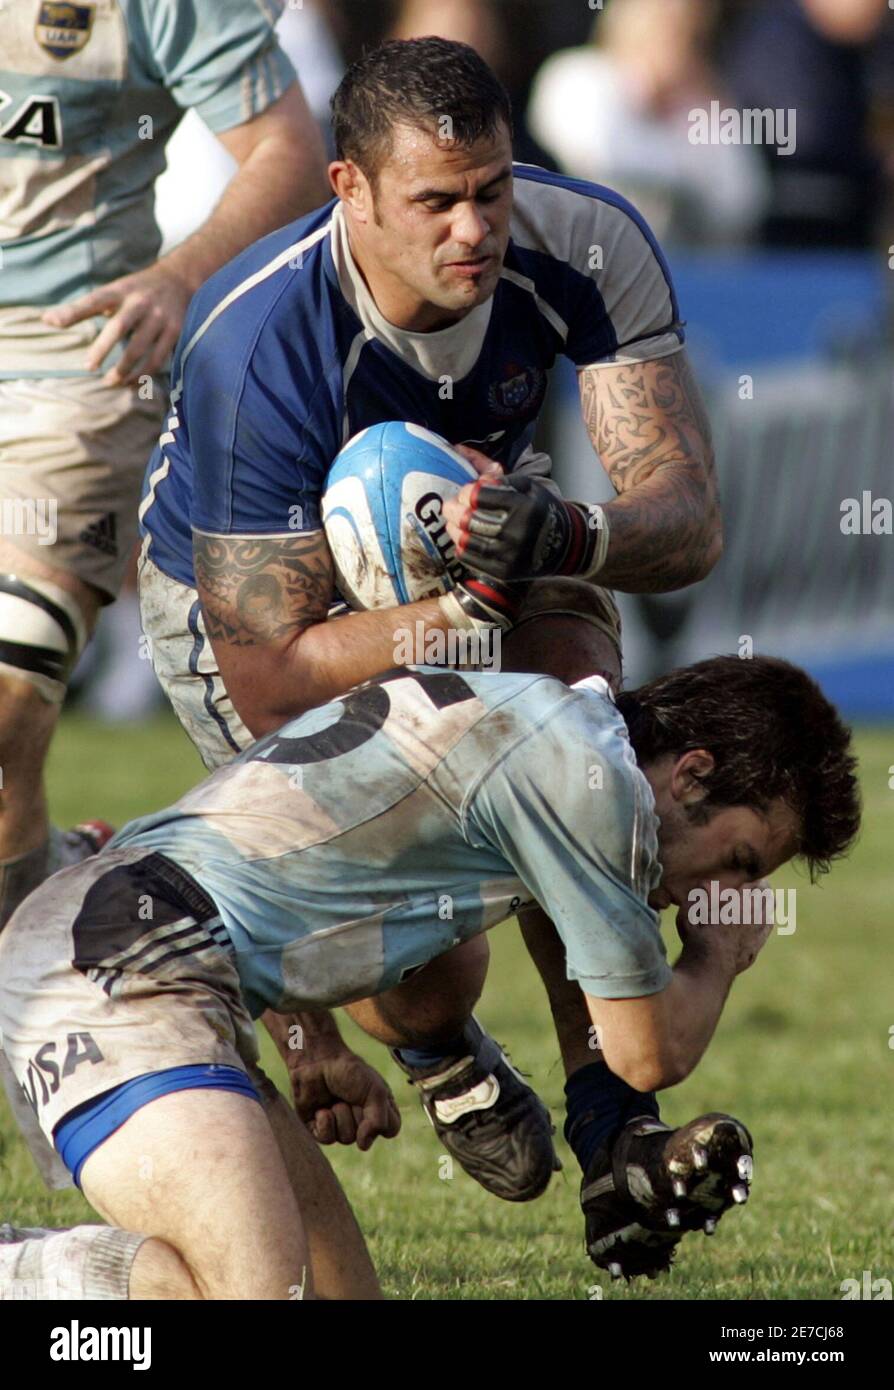 Argentina's Los Pumas Francisco Bosch (above) tackles Samoa's Pail Tupai  during their test match played in Buenos Aires, December 3, 2005. Samoa  beat Los Pumas 28-12. REUTERS/Enrique Marcarian Stock Photo - Alamy